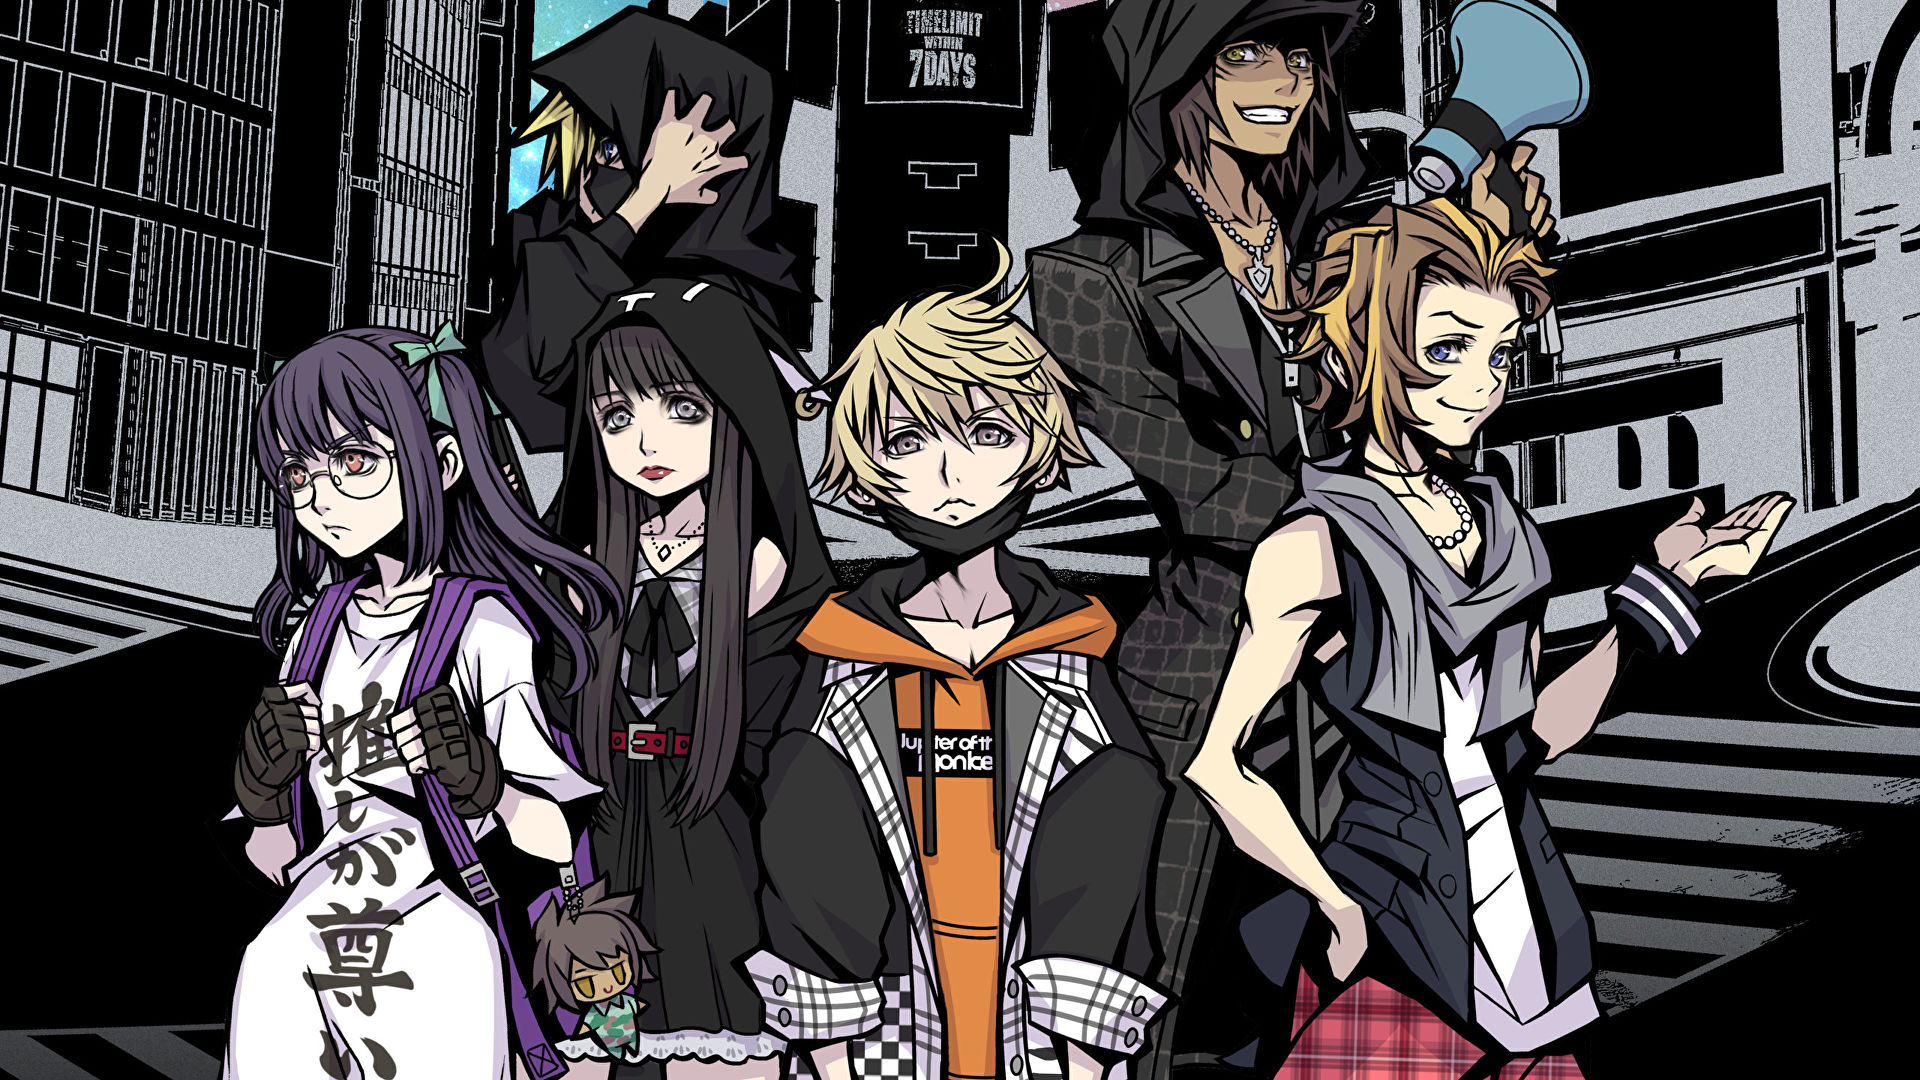 Hands On: NEO: The World Ends With You Brings a Stylish Afterlife